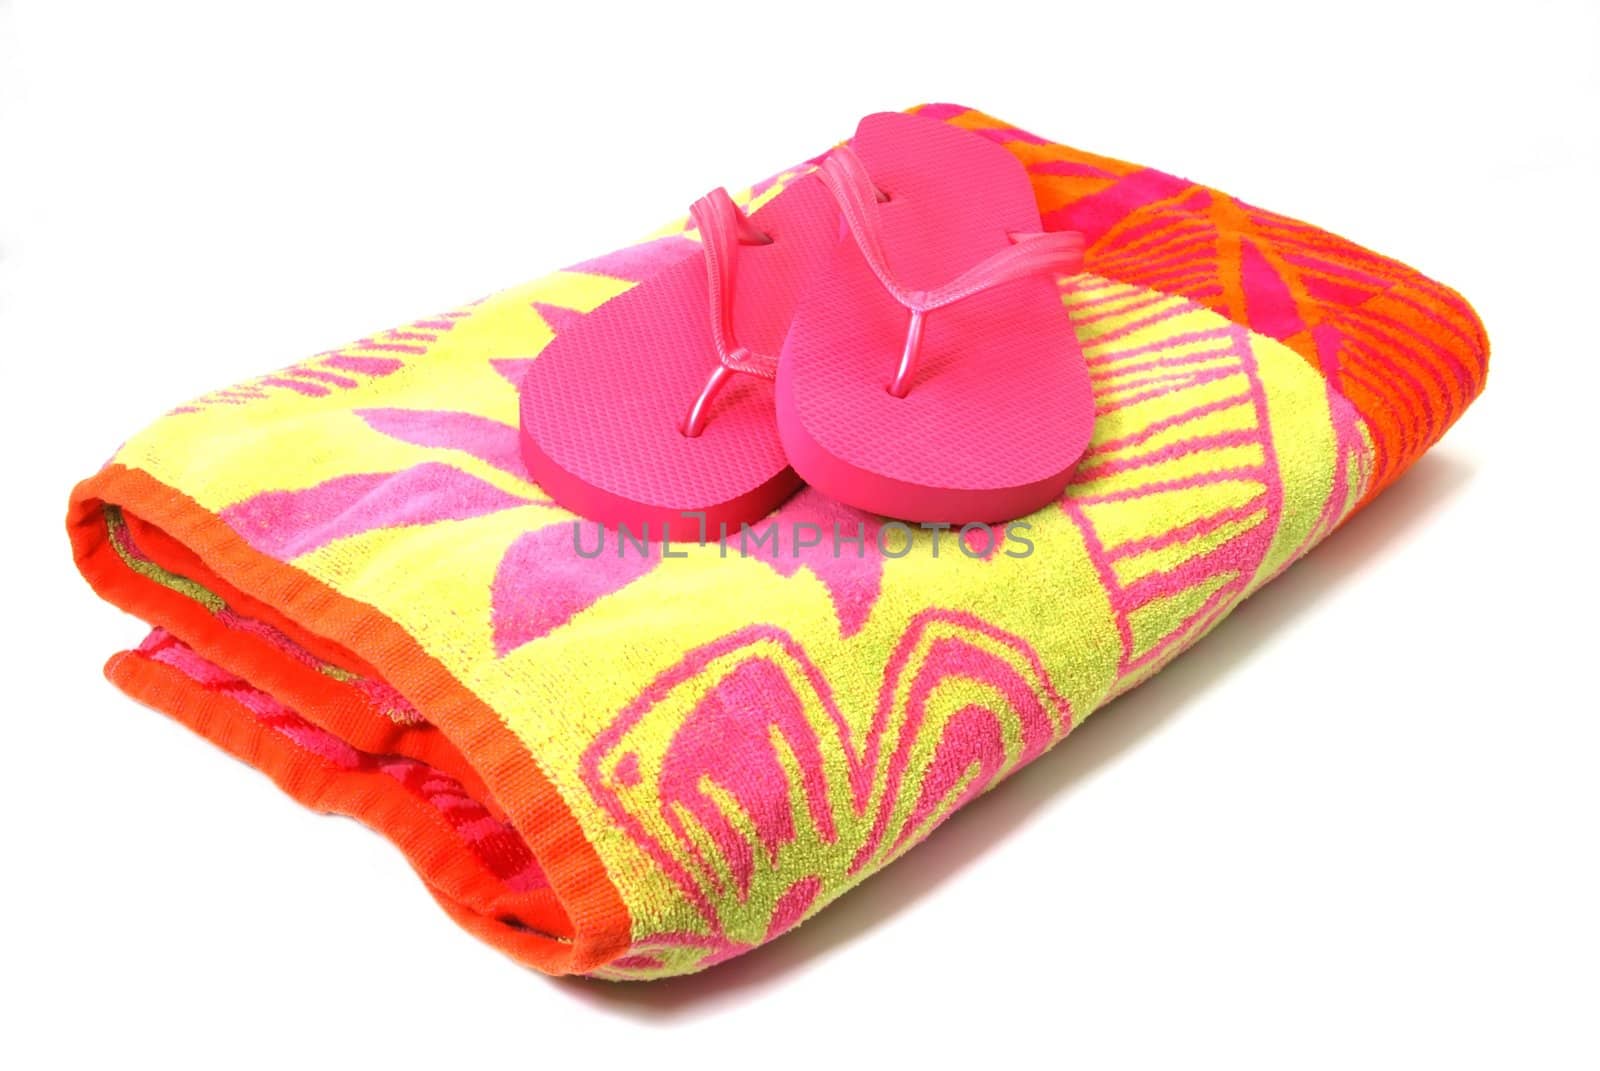 Beach blanket with flip flops isolated on white background with clipping path.